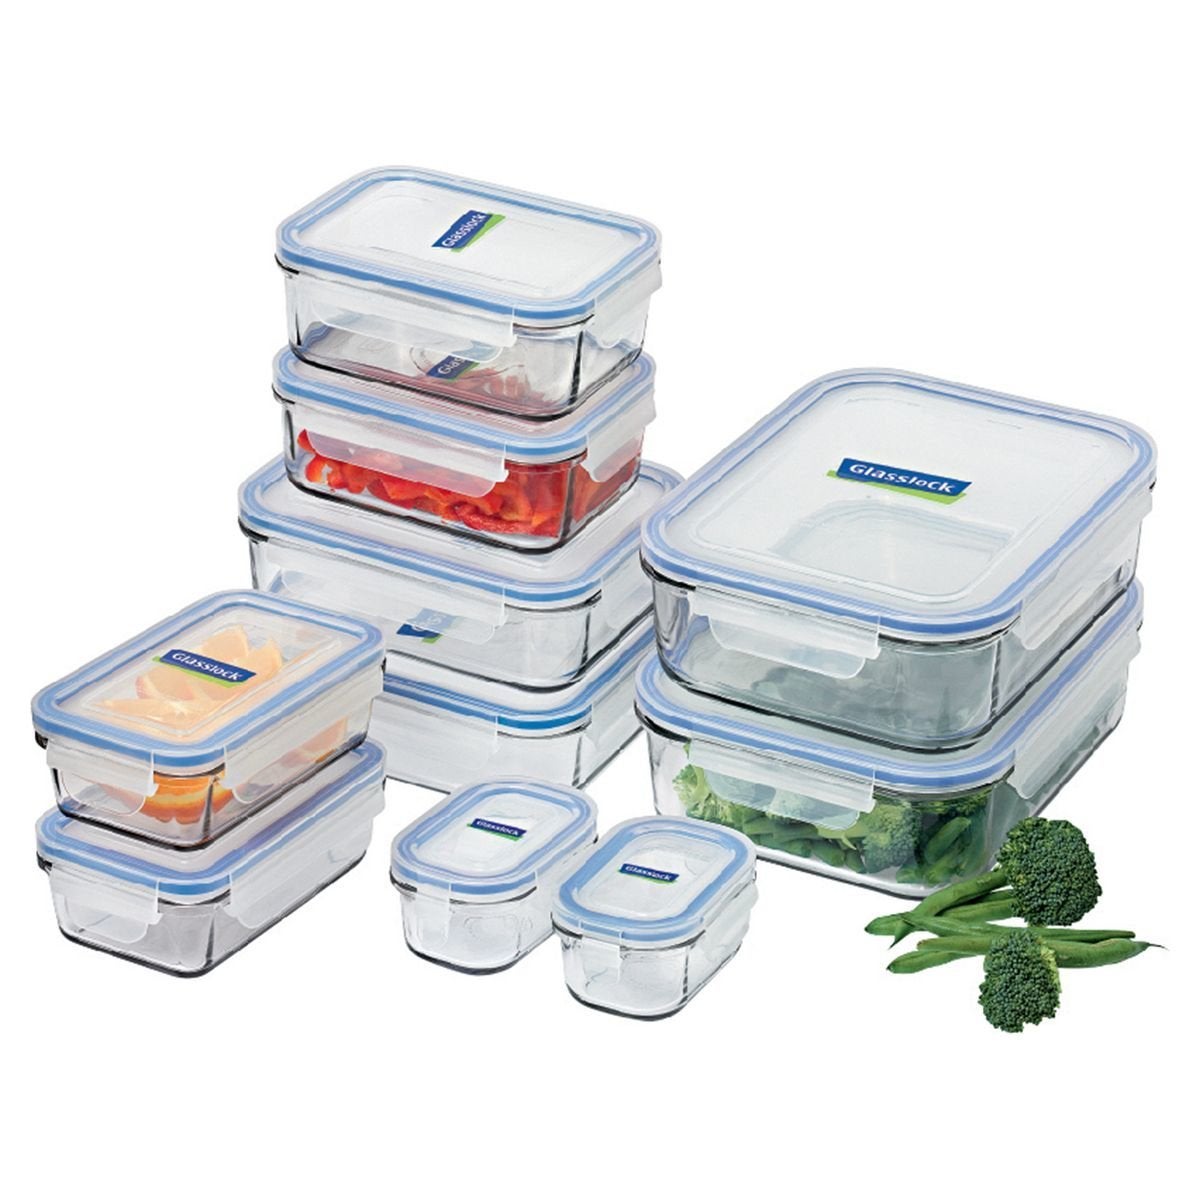 Image of Glasslock 28041 10-Piece Tempered Glass Food Container Set